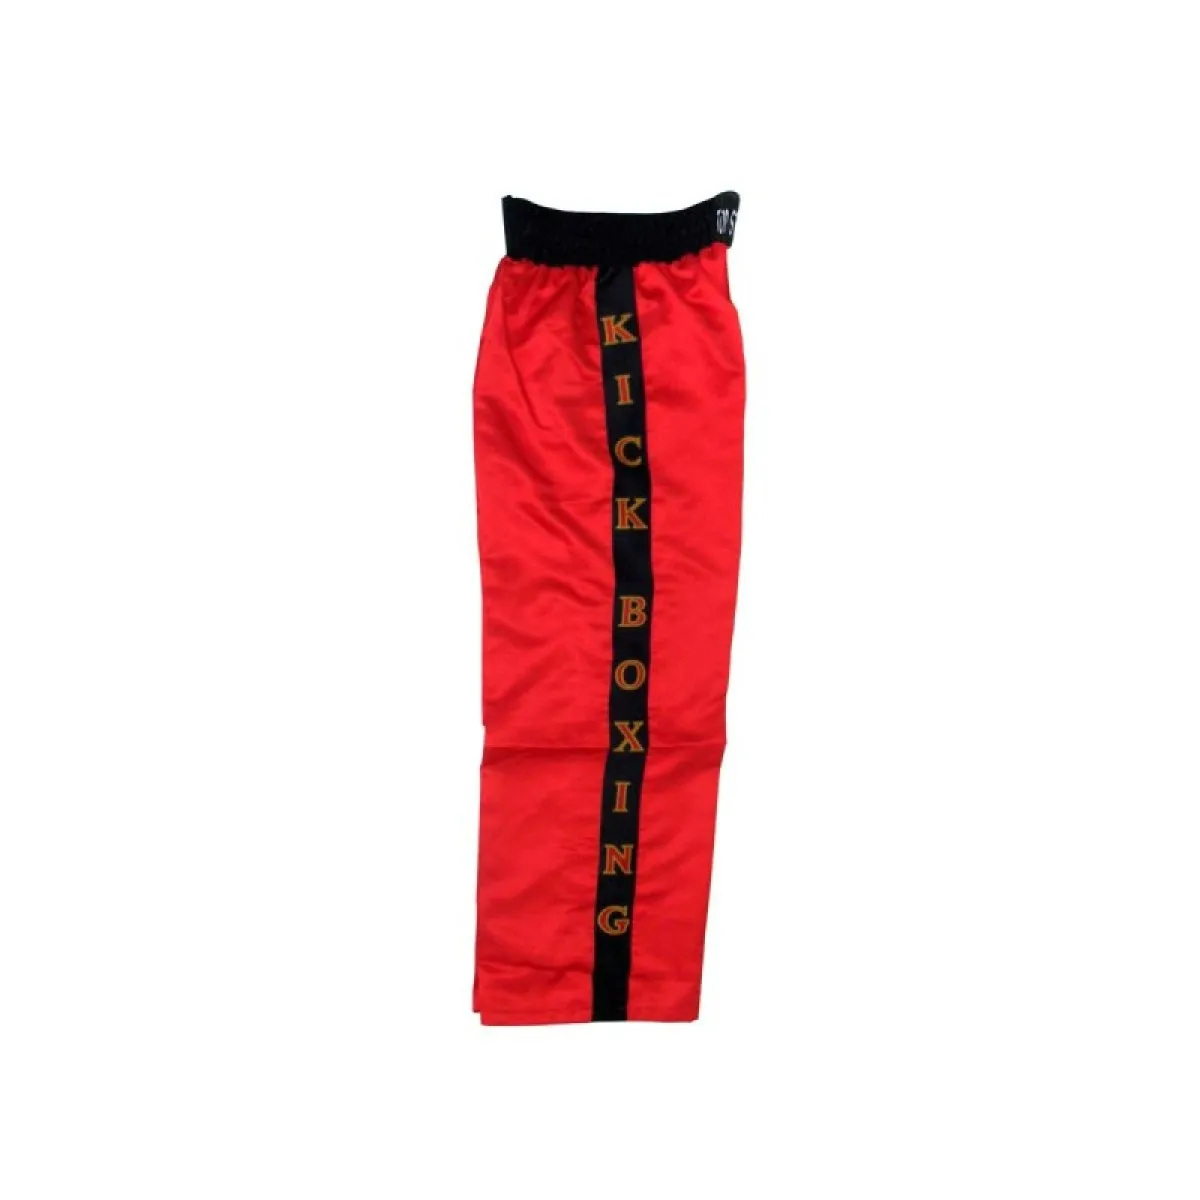 Kickboxing trousers red with black stripes and kickboxing